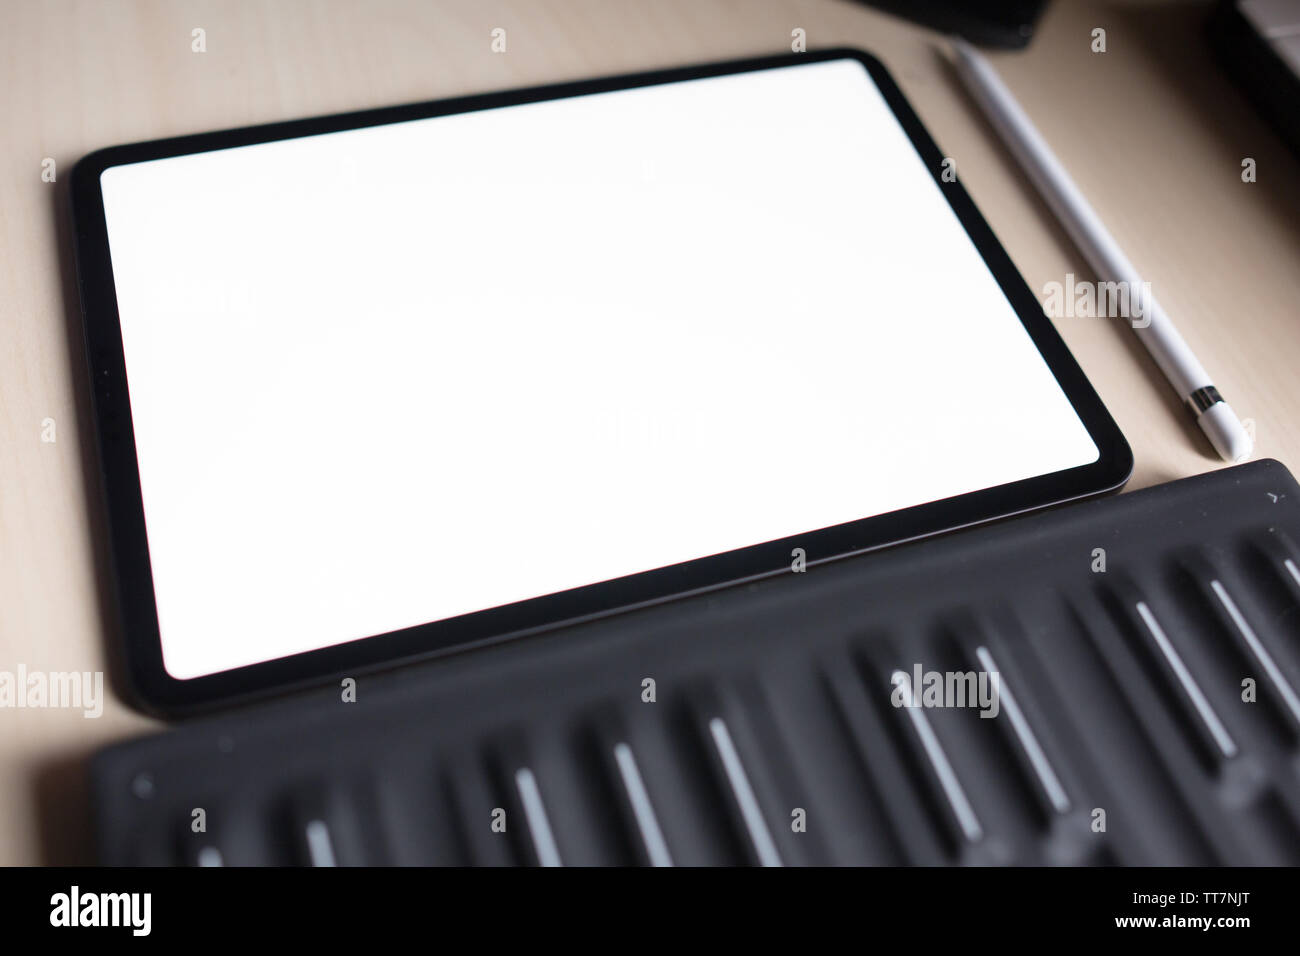 pro tablet for artist with pencil flat lay top view with midi keyboard and synthesizer Stock Photo